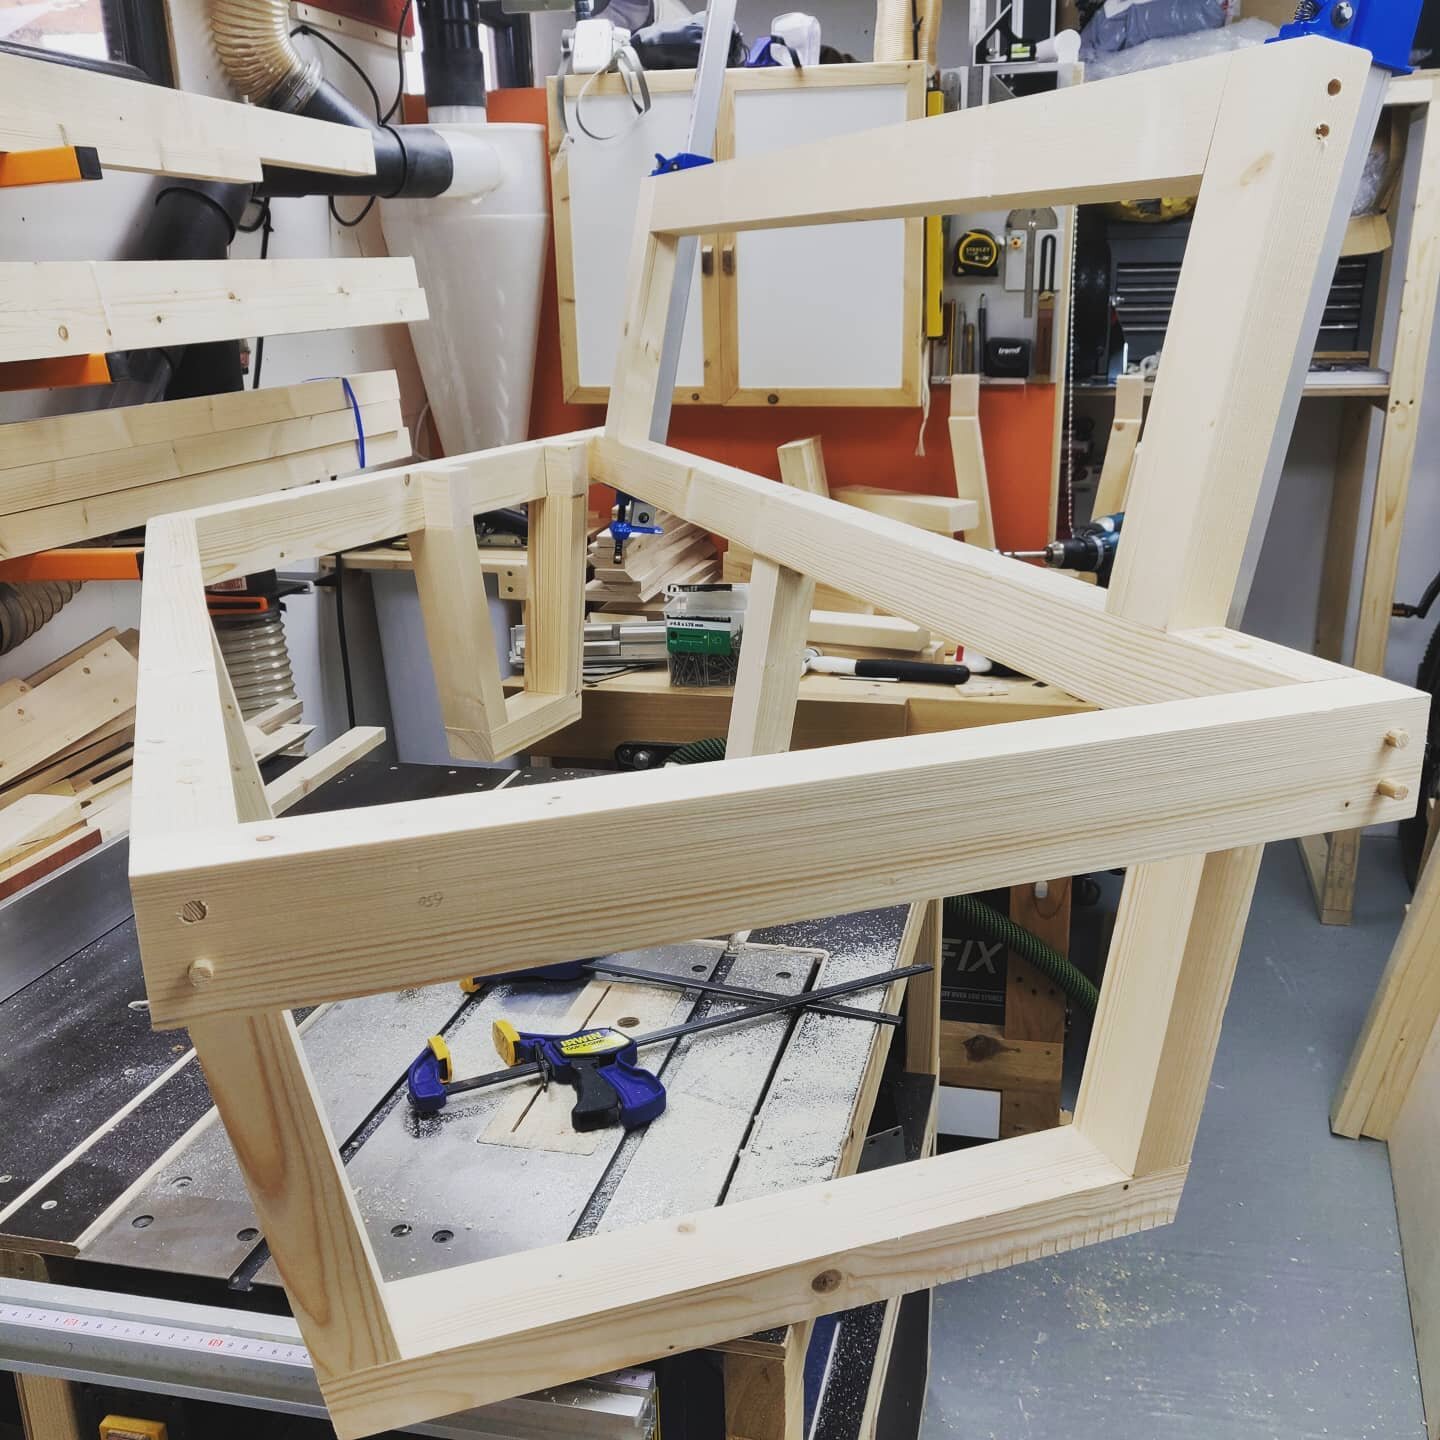 Bespoke garden seats for a client. This project is just at the limit of what our little wood shop can do! But we find a way 💪

#gardendesign #wood #woodworking #bespoke #madewithlove #madeinengland #timberfurniture #woodfurniture #garden #woodshop #